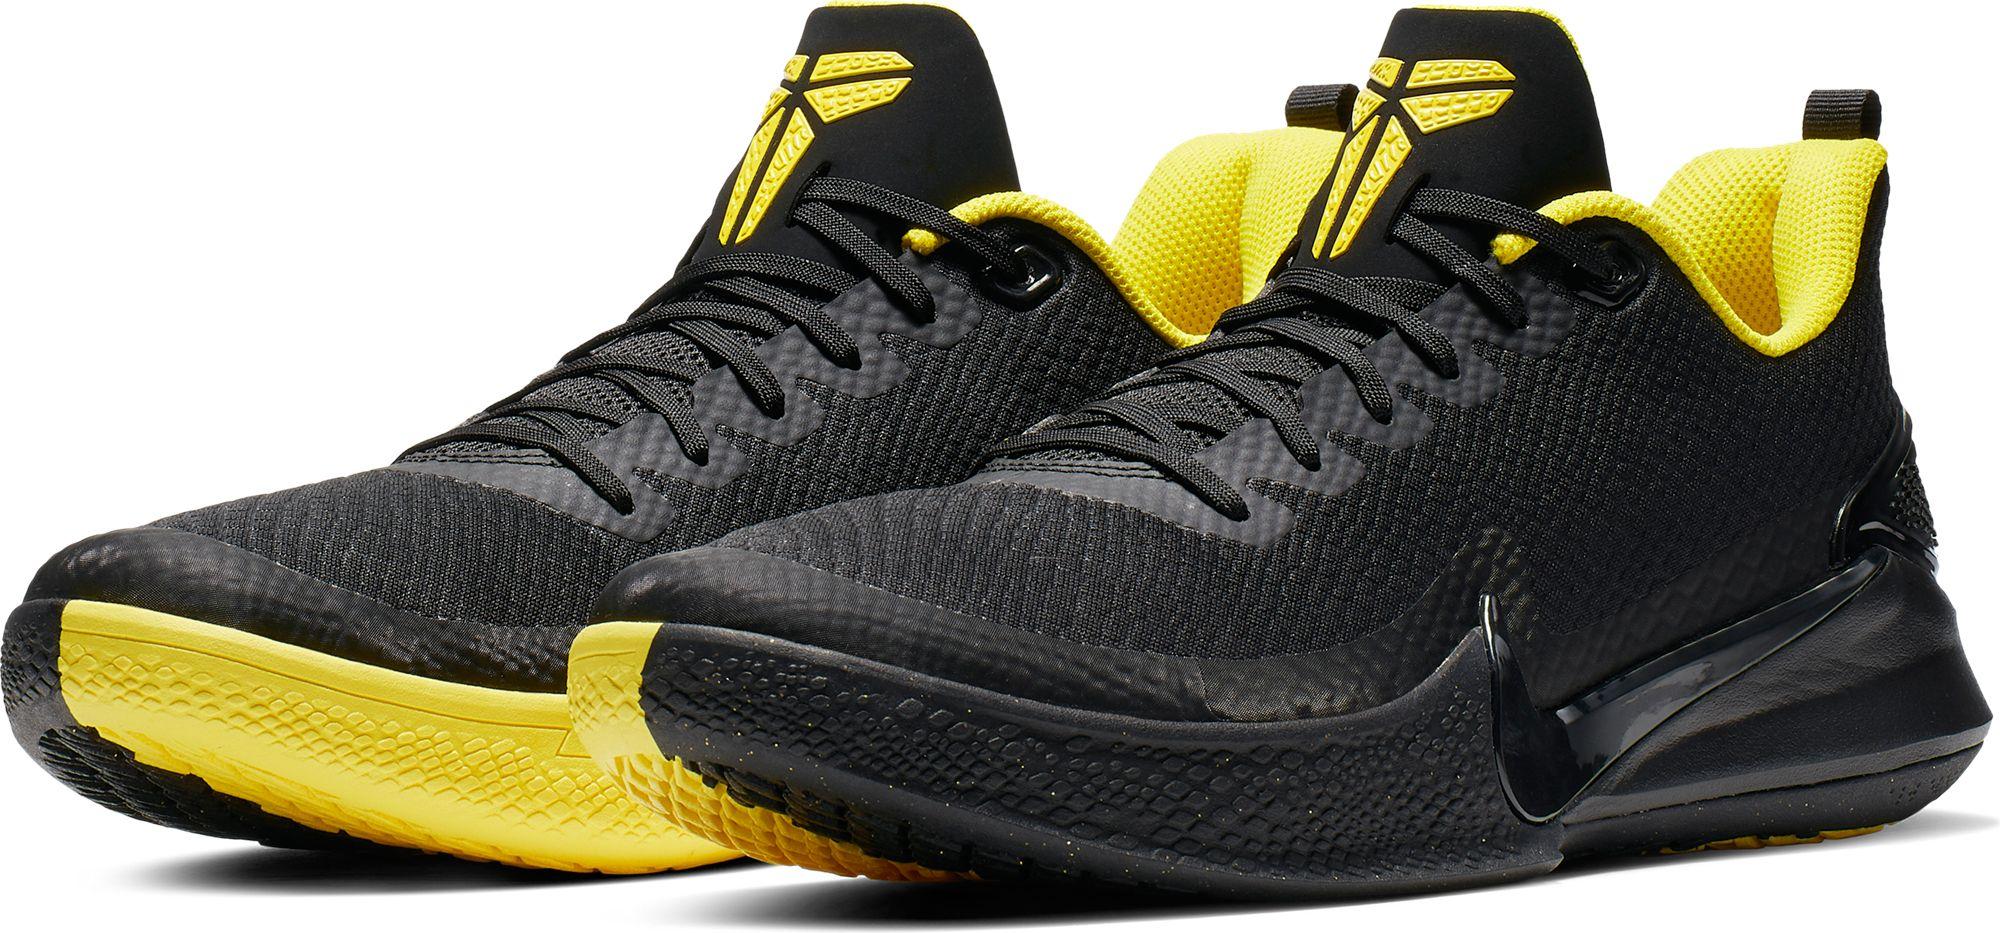 kobe shoes black and yellow